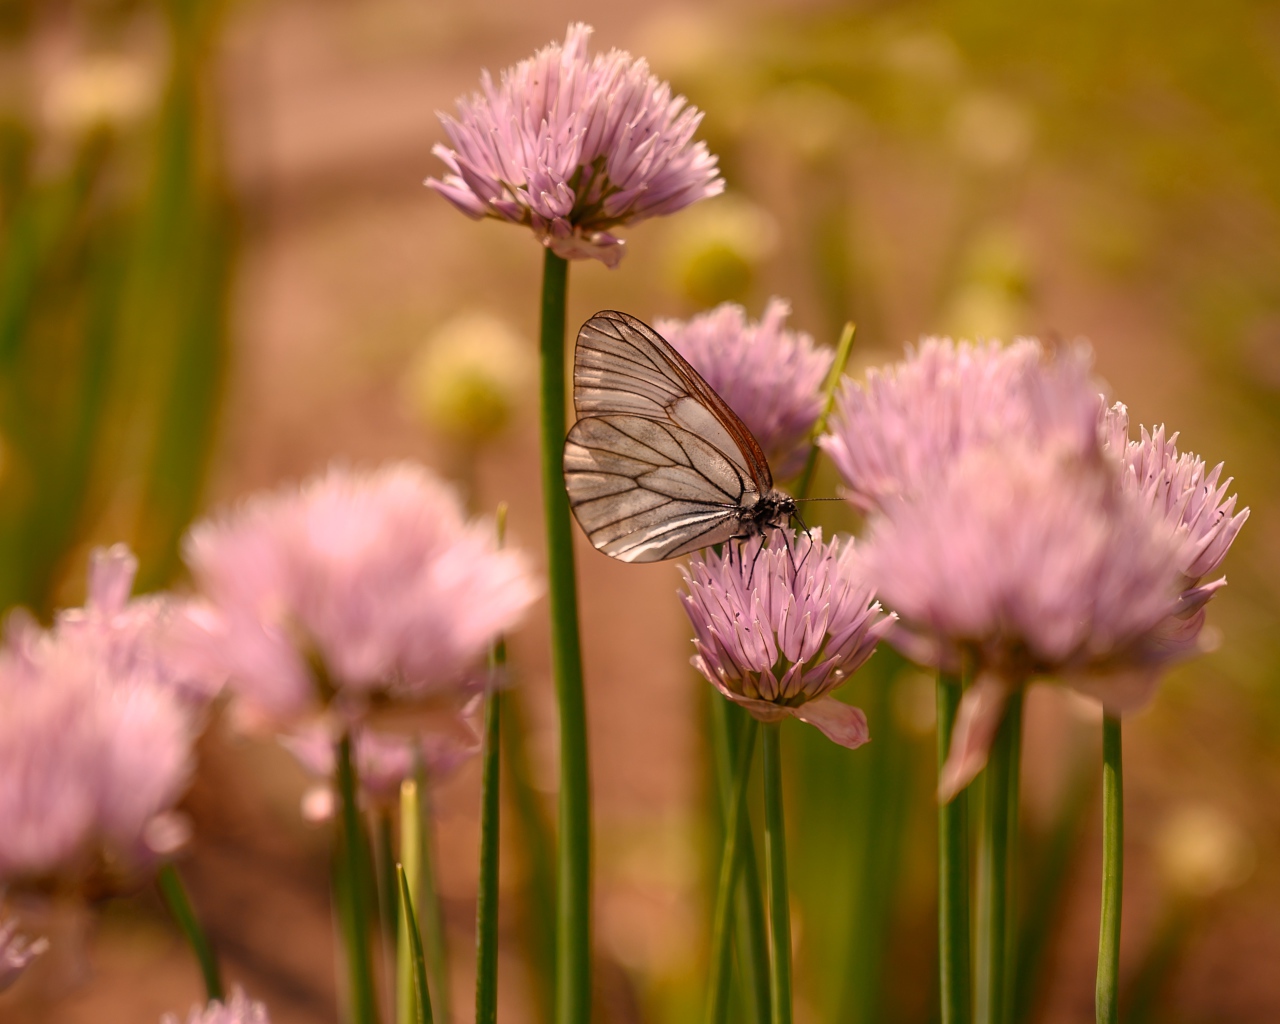 Transparent butterfly sits on a pink flower